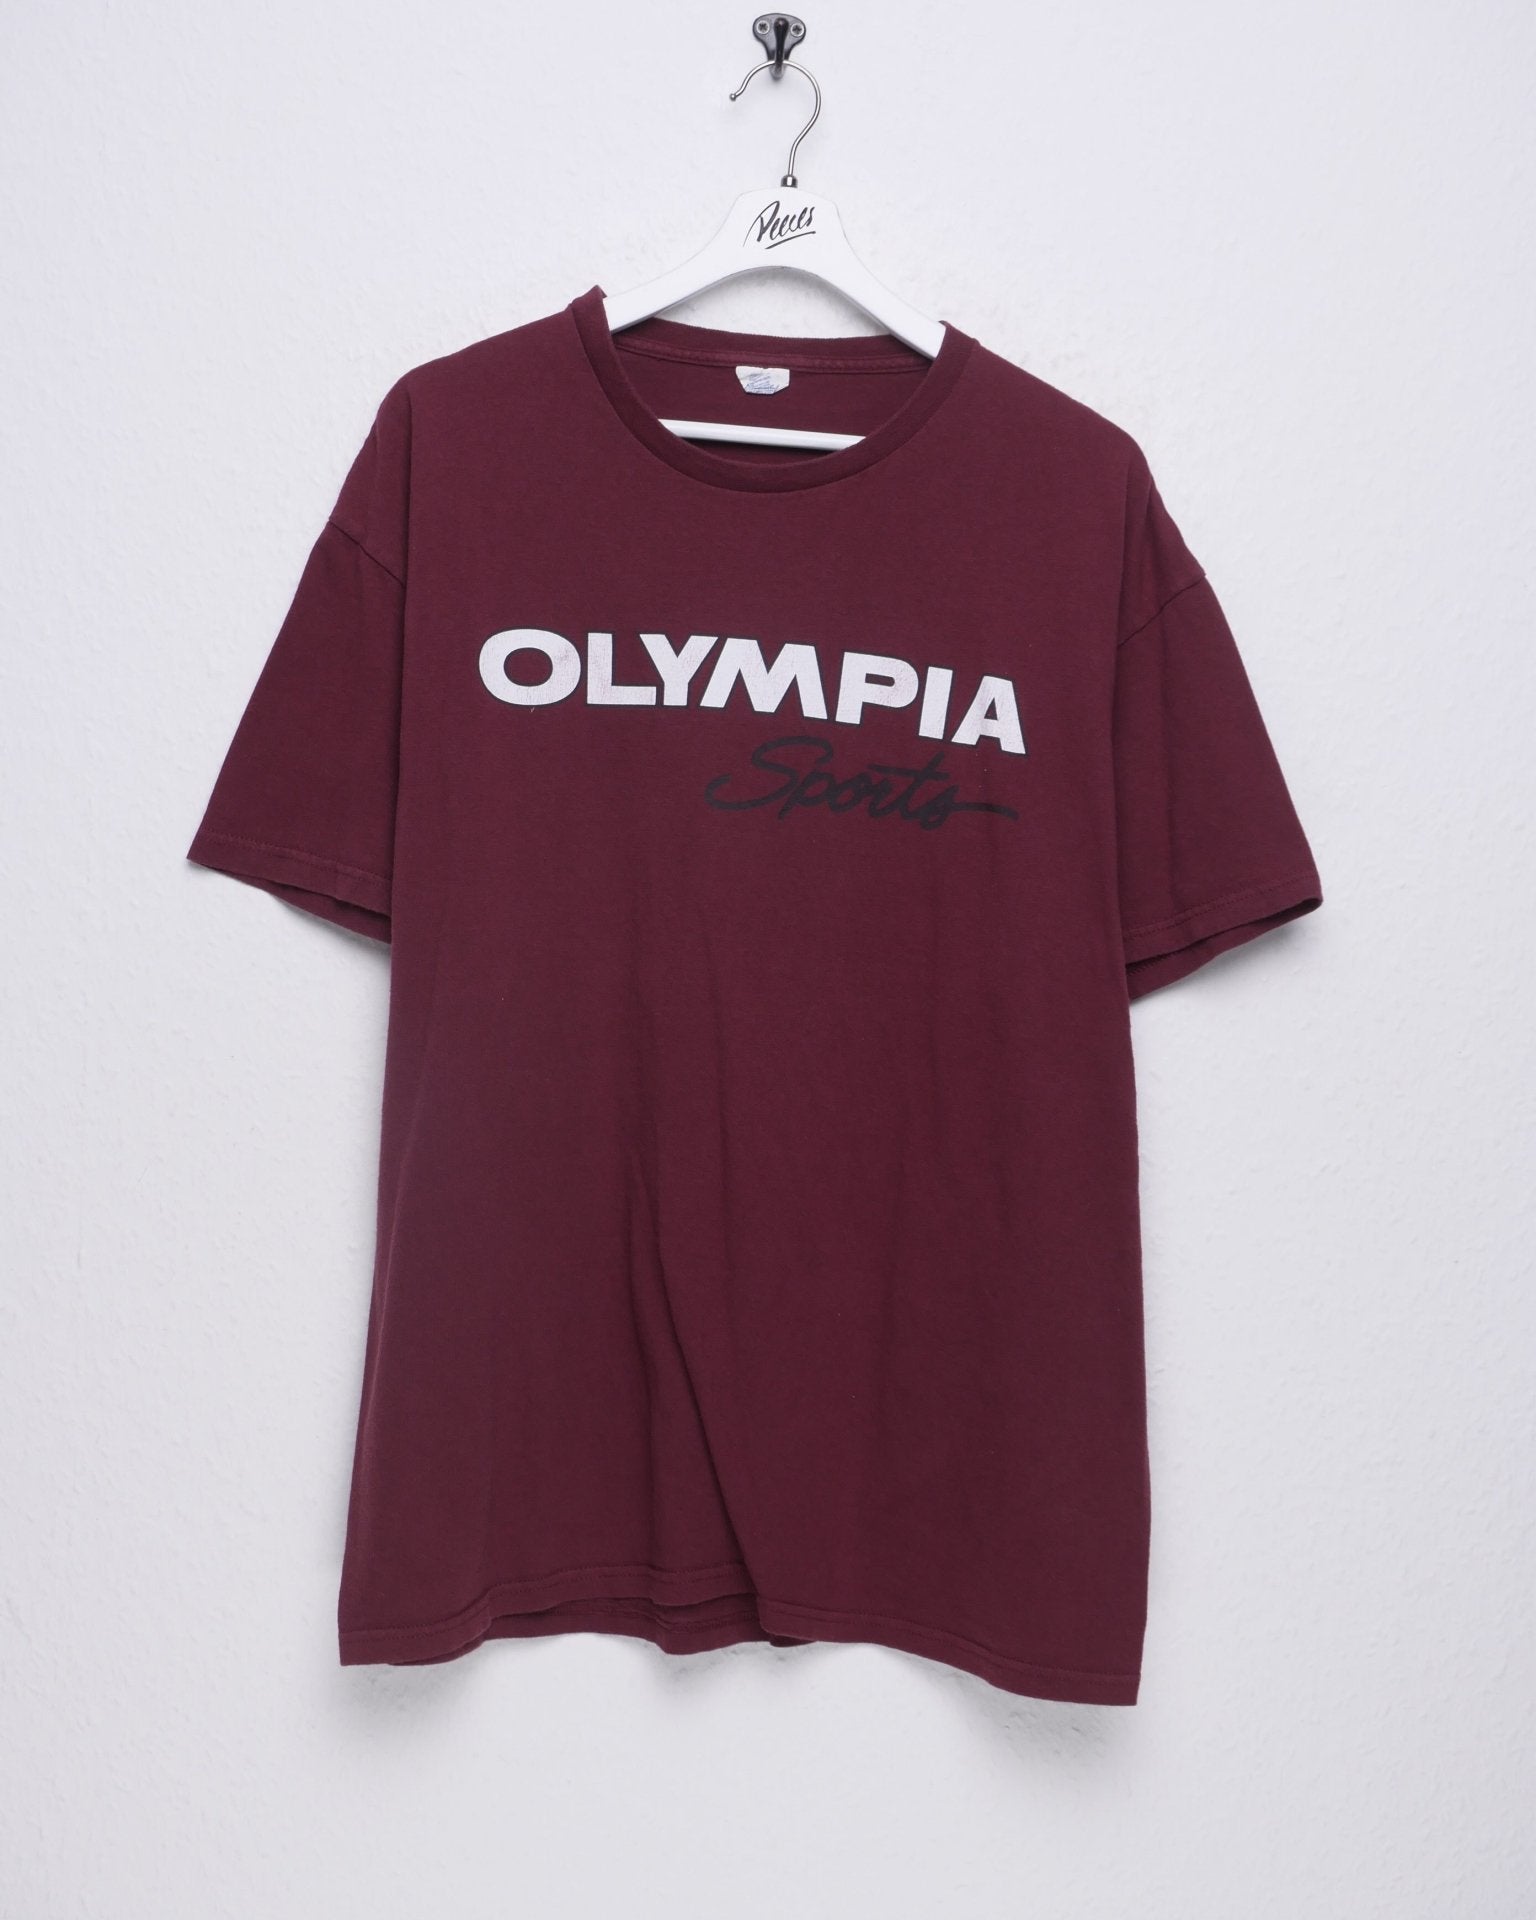 Delta Olympia Sports printed Spellout Vintage Shirt - Peeces